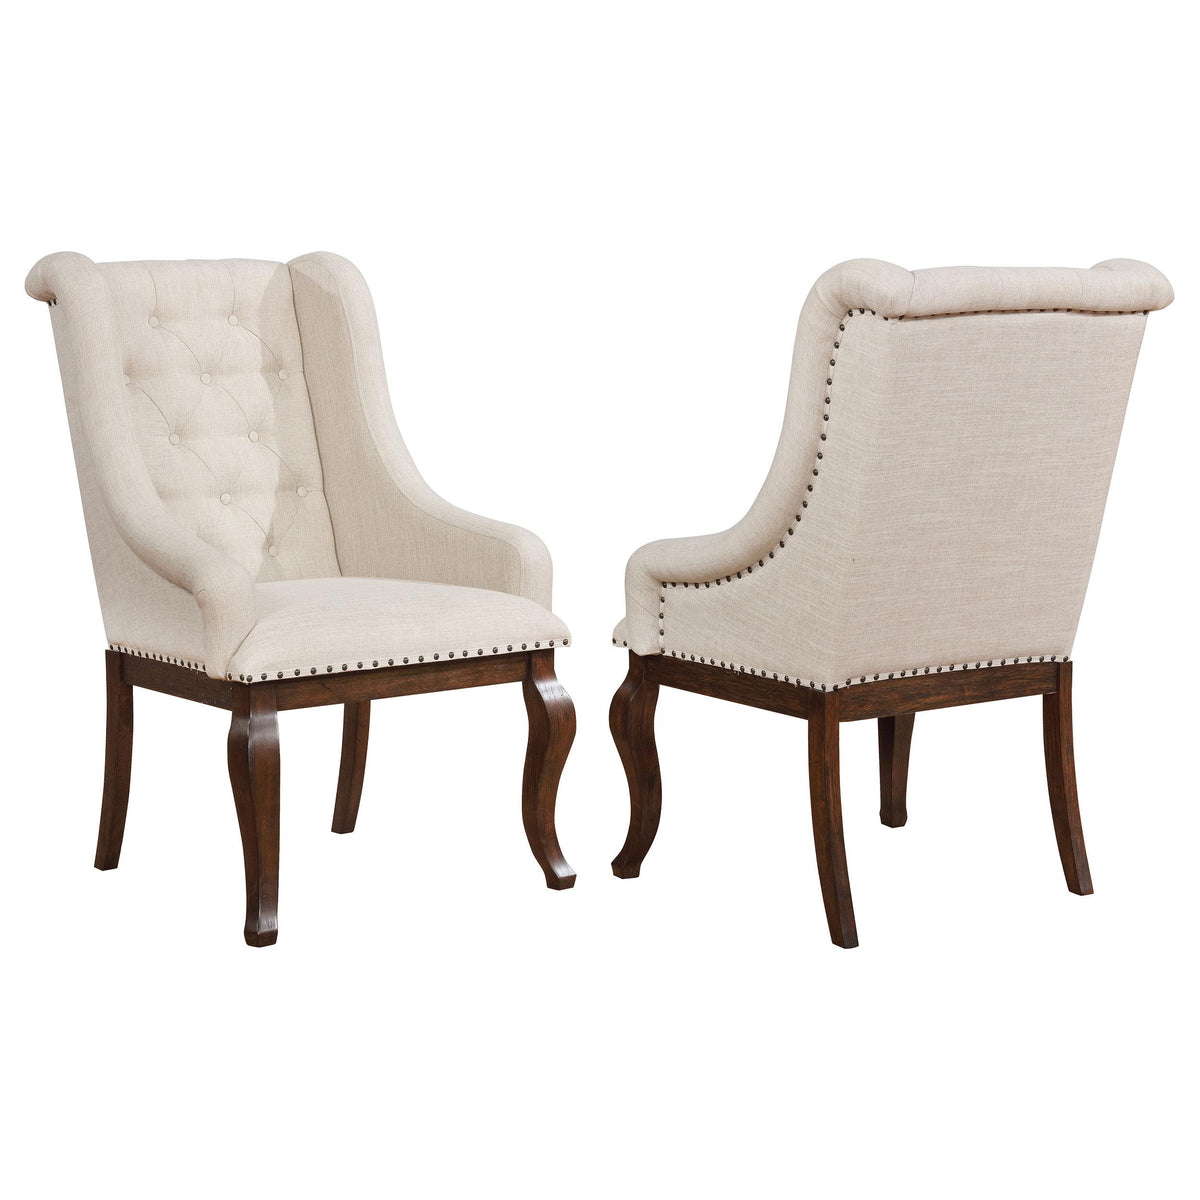 Brockway Tufted Arm Chairs Cream and Antique Java (Set of 2)  Las Vegas Furniture Stores